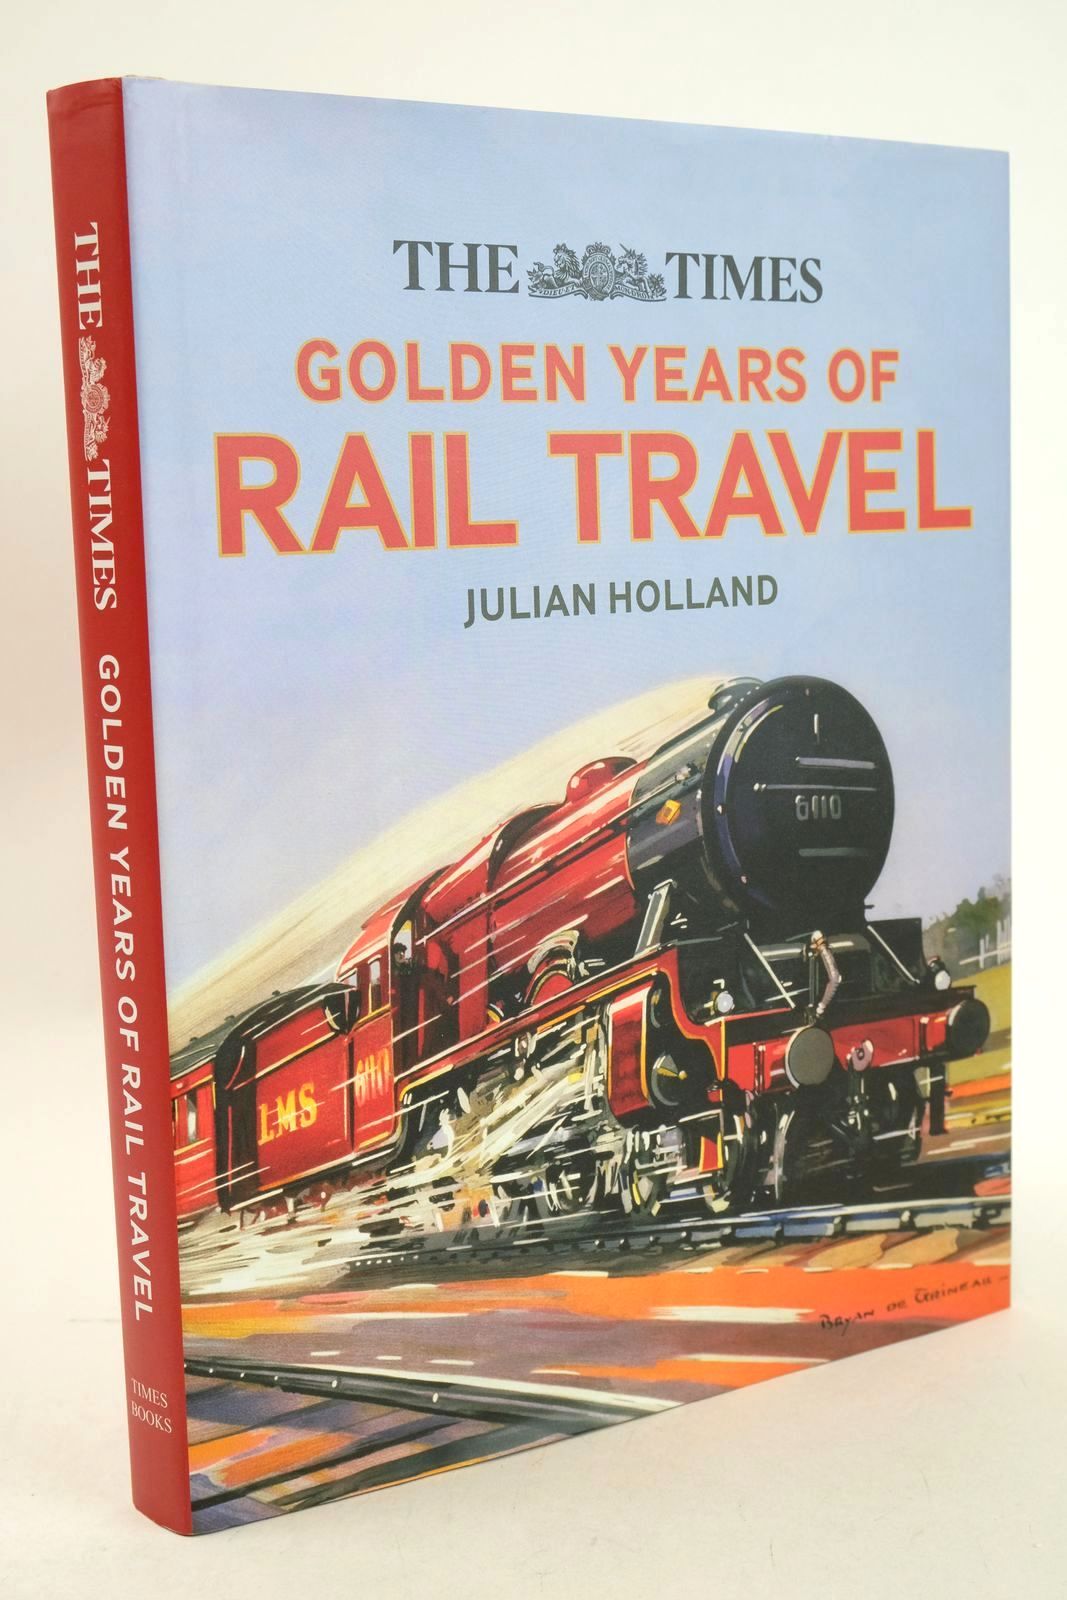 Photo of THE TIMES GOLDEN YEARS OF RAIL TRAVEL written by Holland, Julian published by Times Books (STOCK CODE: 1327023)  for sale by Stella & Rose's Books